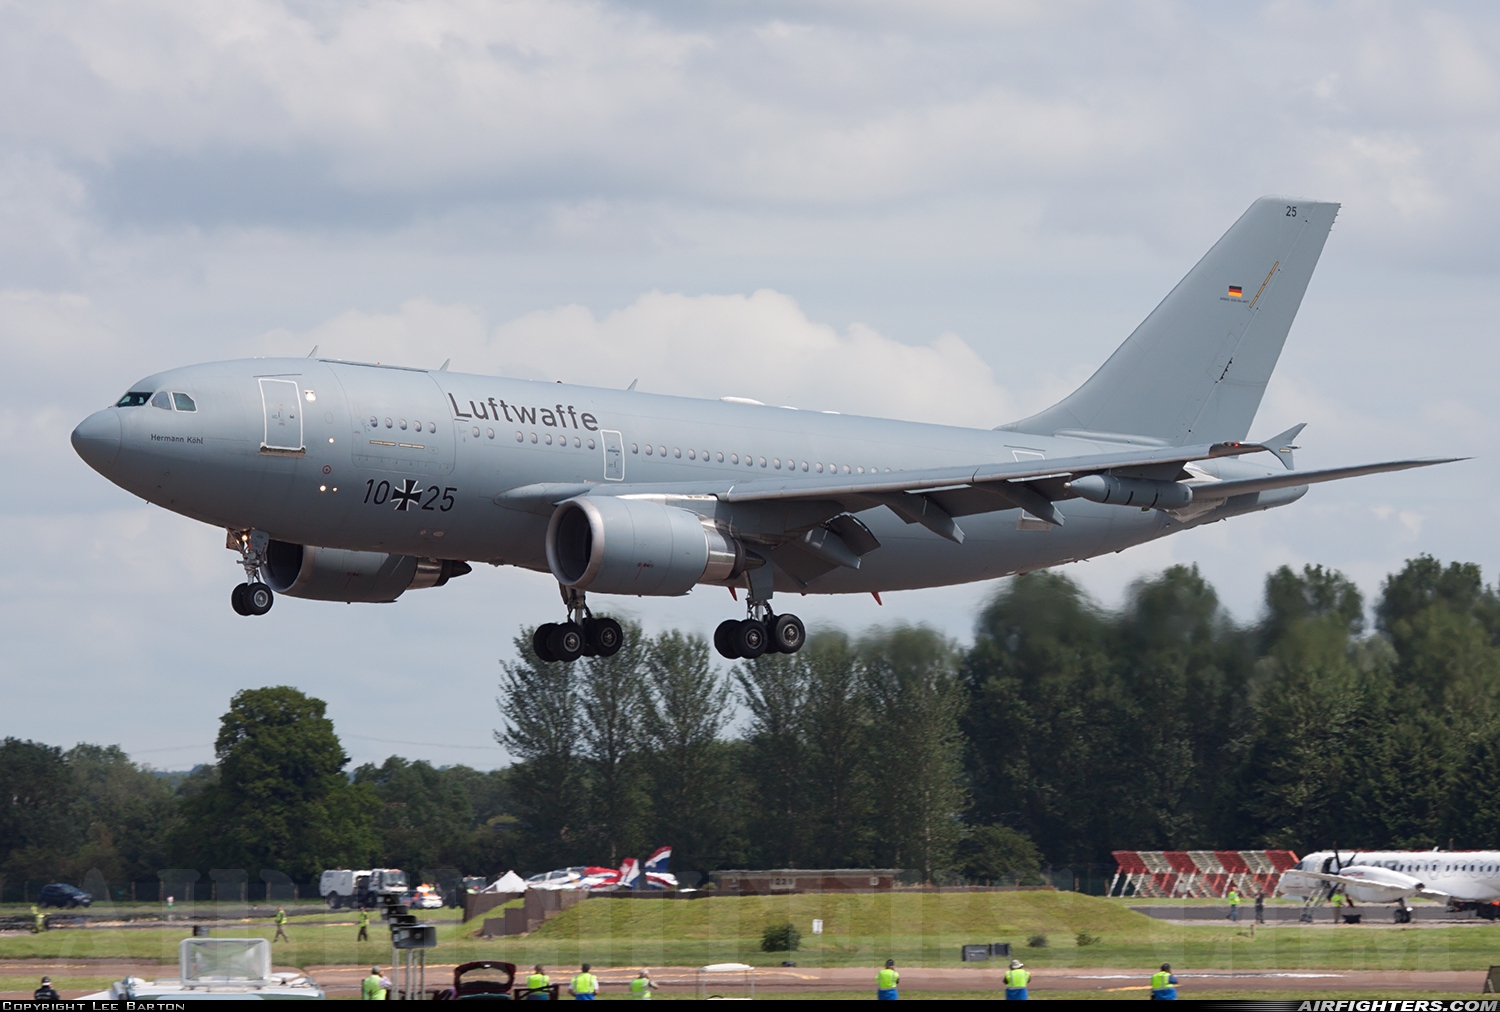 Germany - Air Force Airbus A310-304MRTT 10+25 at Fairford (FFD / EGVA), UK